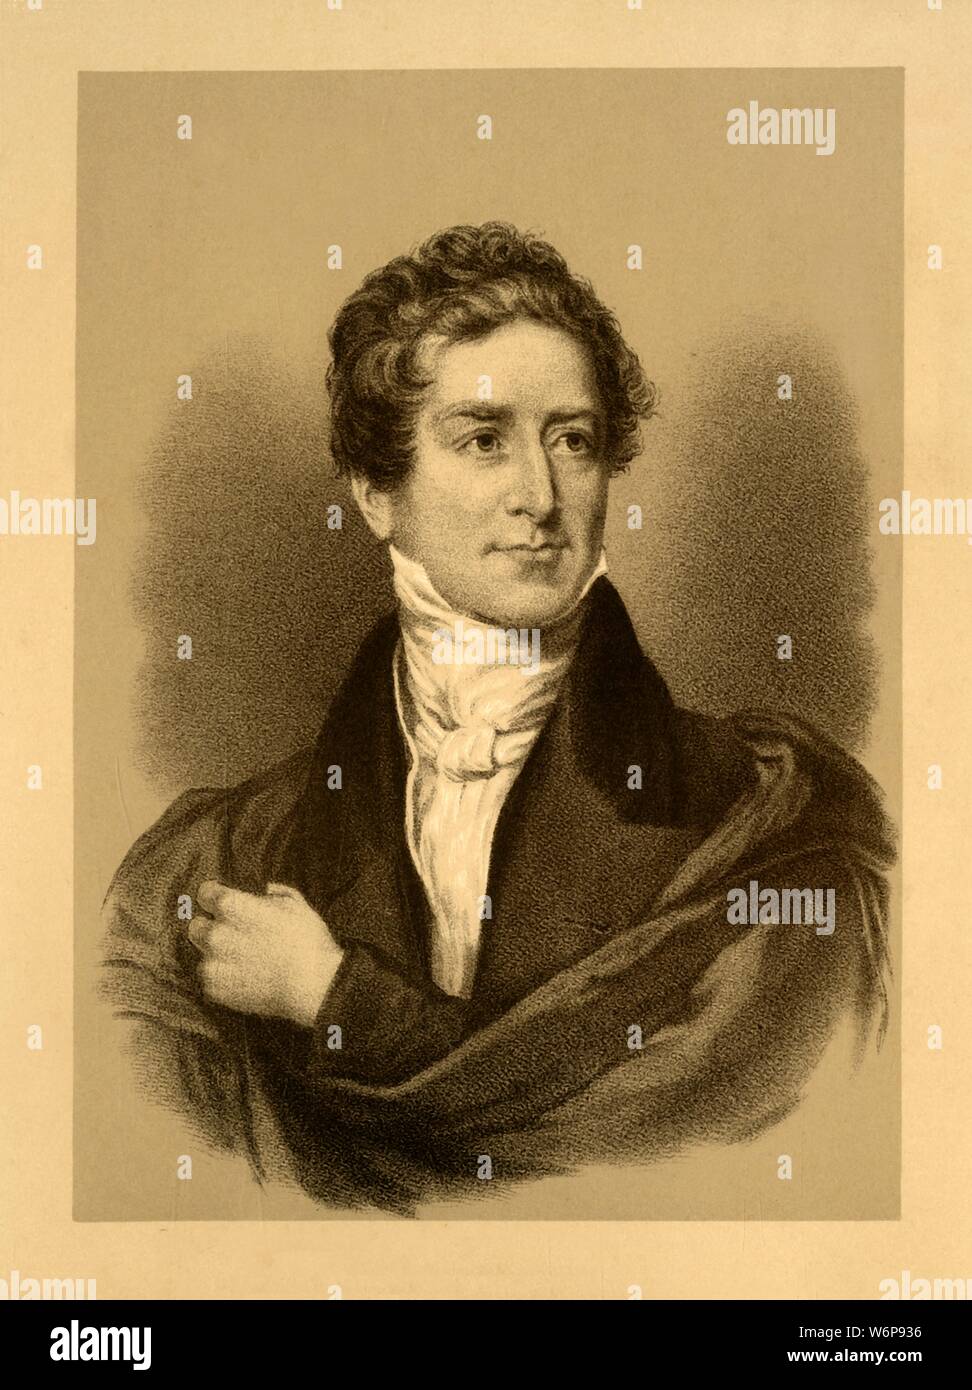 'Sir Robert Peel, Bart. Premier 1834-1835 and 1841-1846', c1820, (c1880). Sir Robert Peel, 2nd Baronet (1788-1850) British statesman and Conservative Party politician who served twice as Prime Minister of the United Kingdom, regarded as the father of modern British policing, as founder of the Metropolitian Police. [Blackie &amp; Son, London, Glasgow &amp; Edinburgh] Stock Photo